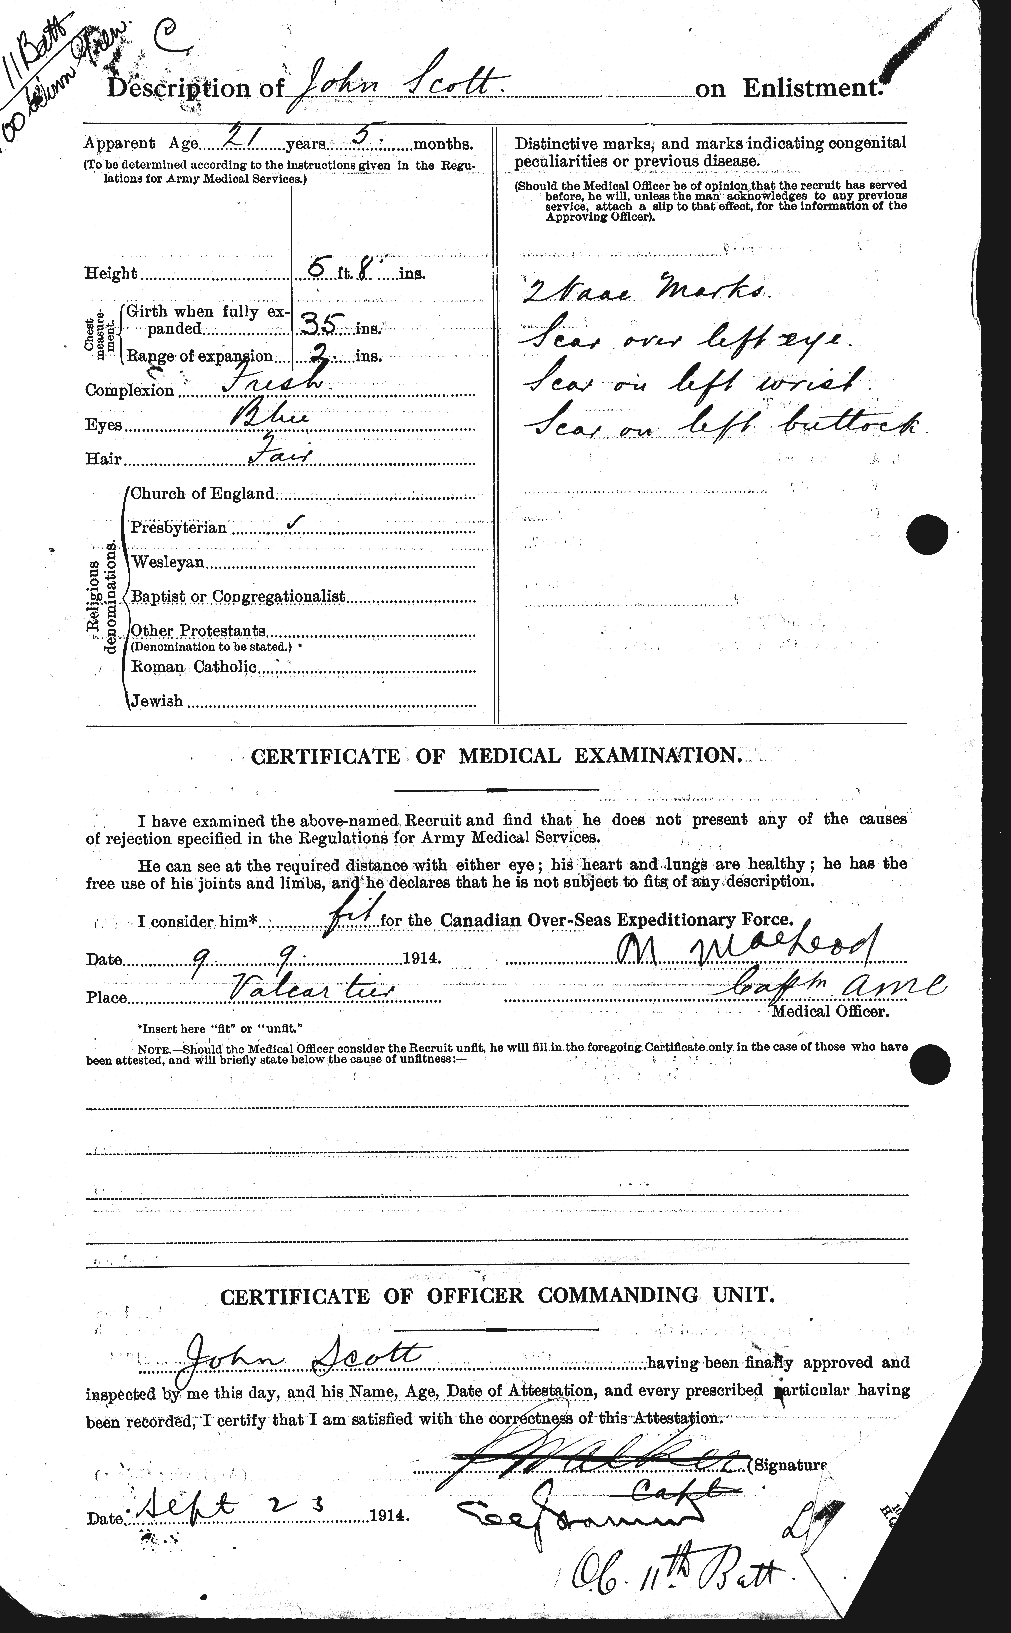 Personnel Records of the First World War - CEF 084895b